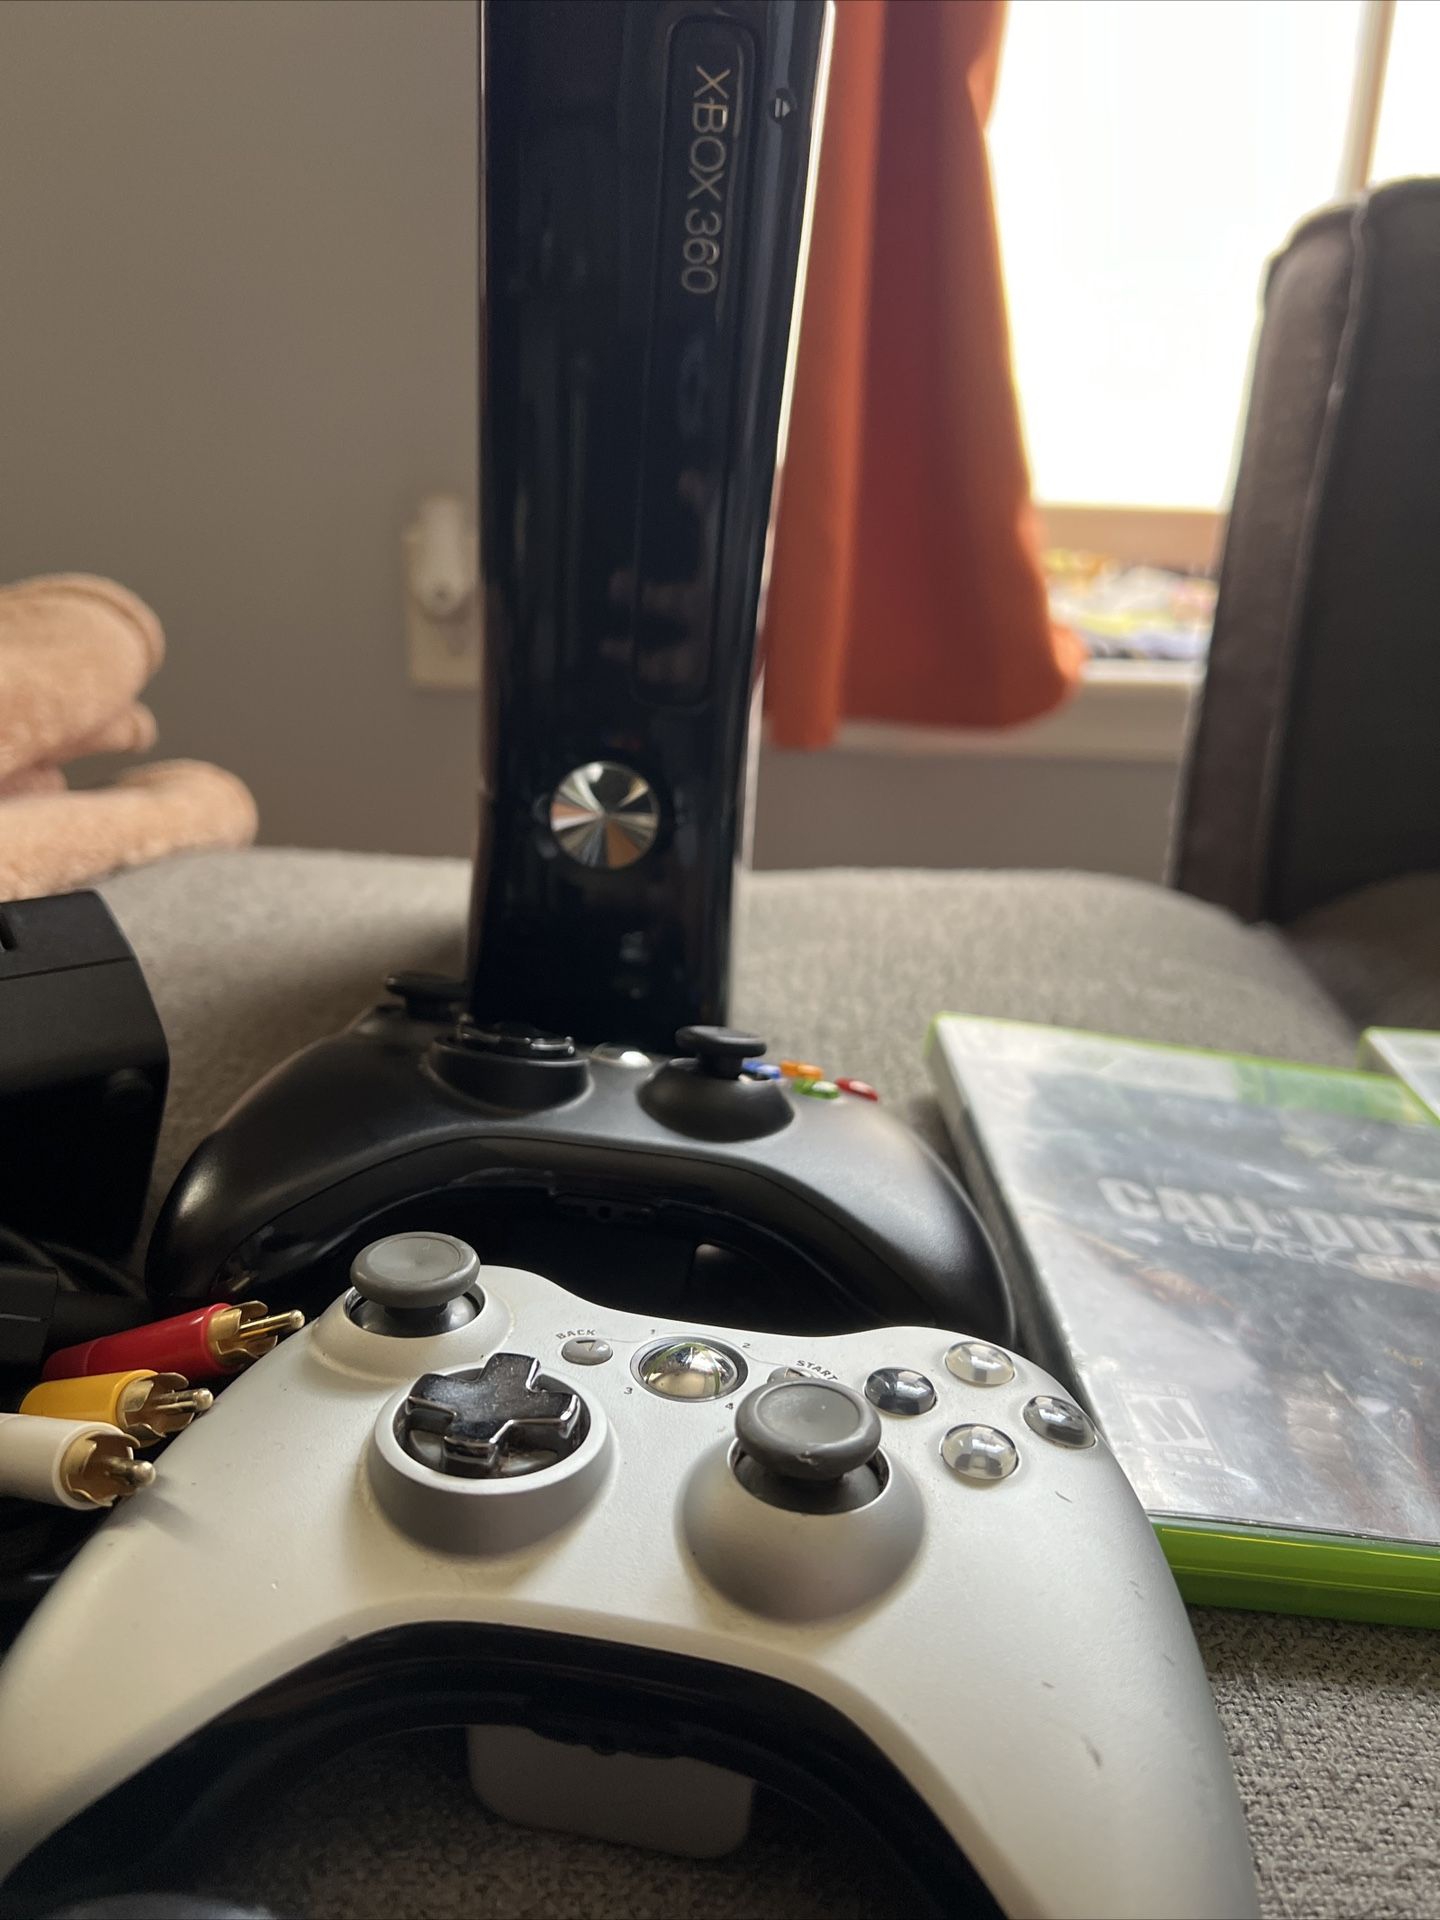 XBOX 360 500 GBs, With Games, And 3 Controllers